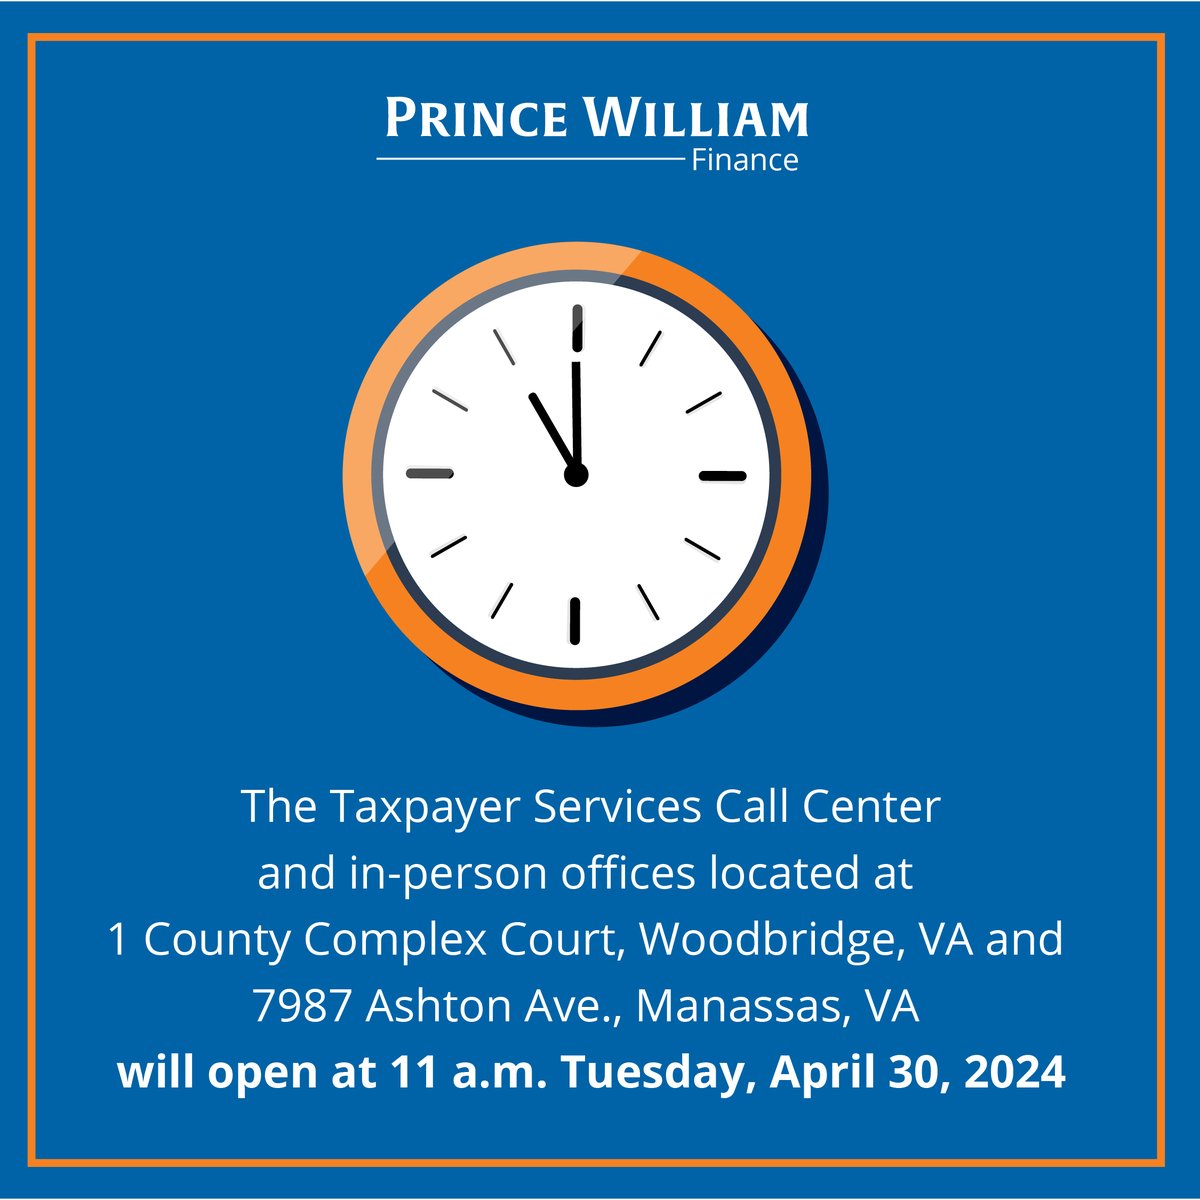 The Taxpayer Services Call Center and in-person offices located at 1 County Complex Court, Woodbridge, VA and 7987 Ashton Aven., Manassas, VA will open at 11 a.m. Tuesday, April 30, 2024. Online taxpayer services will be available at tax.pwcgov.org.